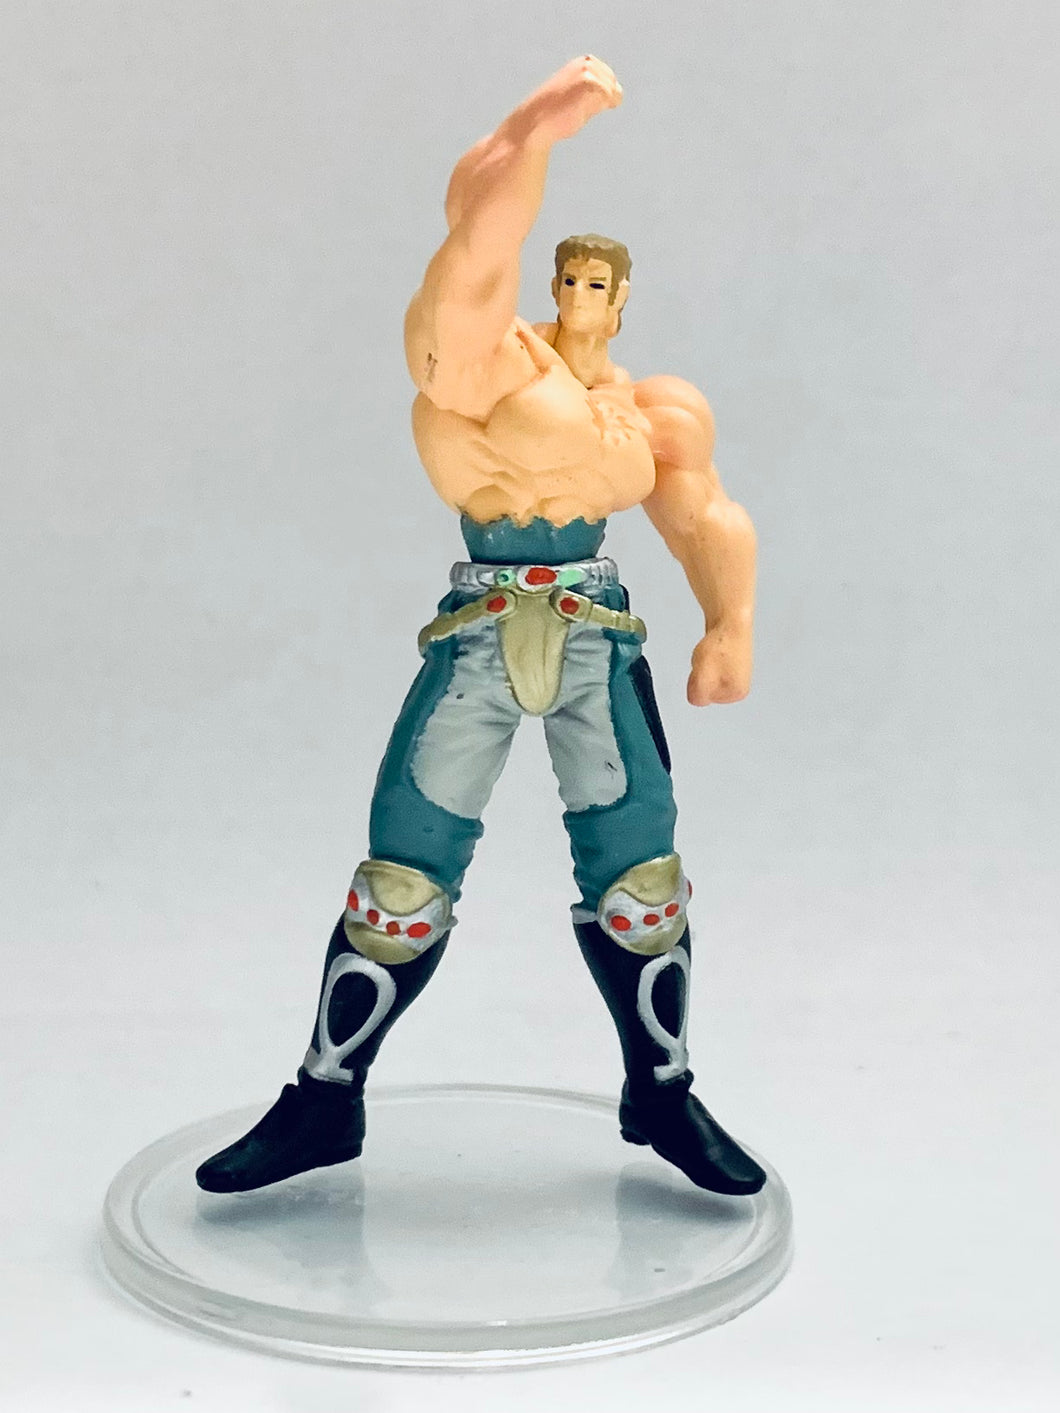 Hokuto no Ken - Raoh - Fist of the North Star All-Star Retsuden Capsule Figure Collection Part 4 - Advent! End of the Century Conqueror - Repainted ver.